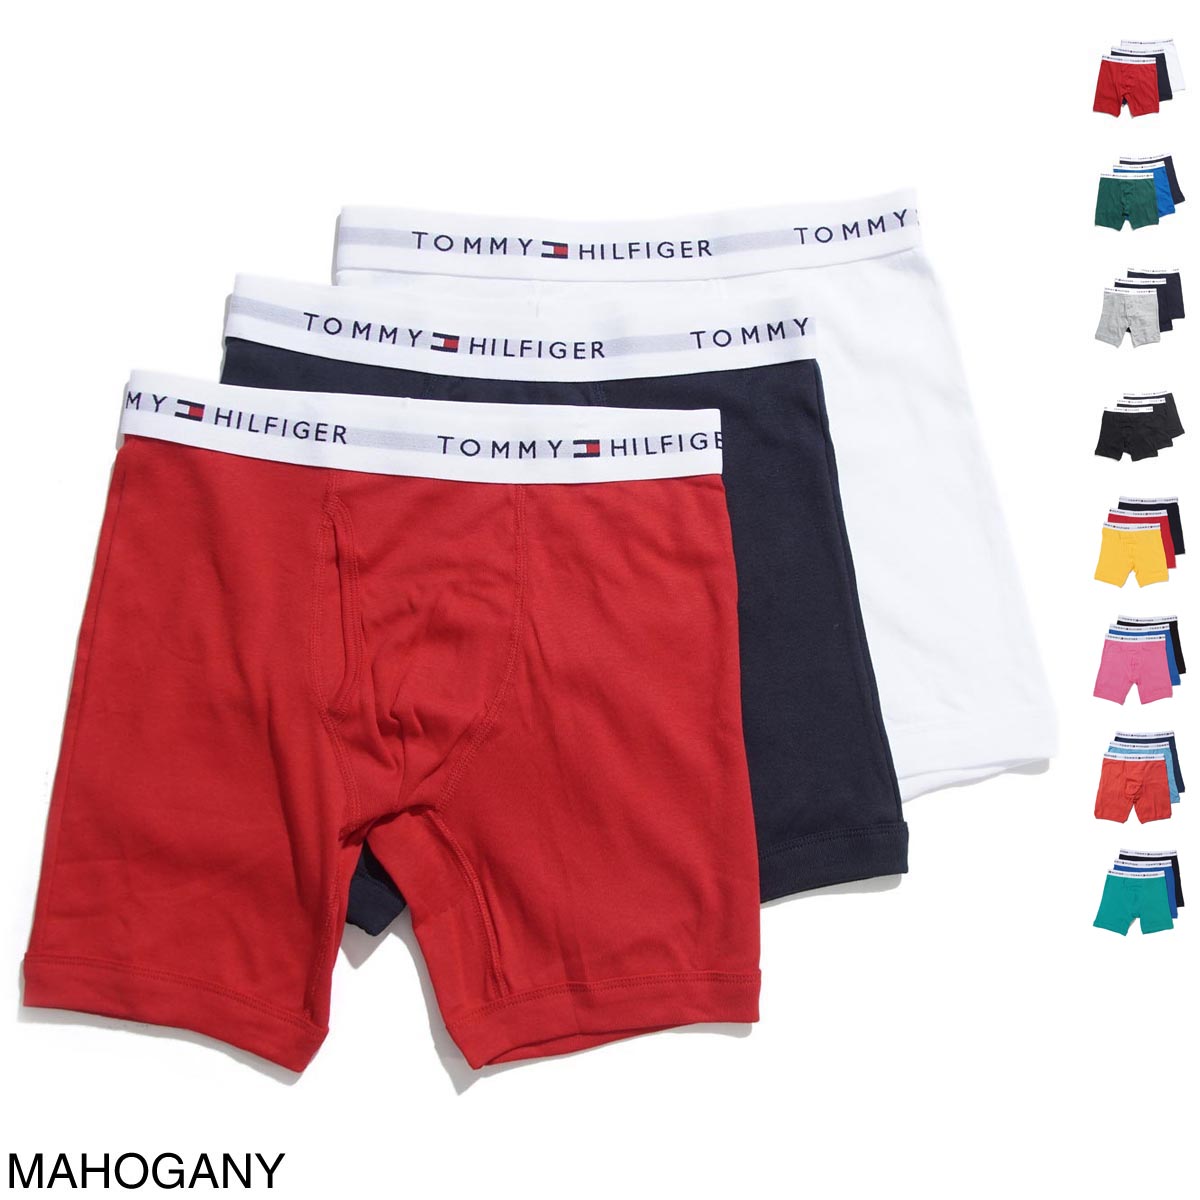 where can i buy tommy hilfiger underwear